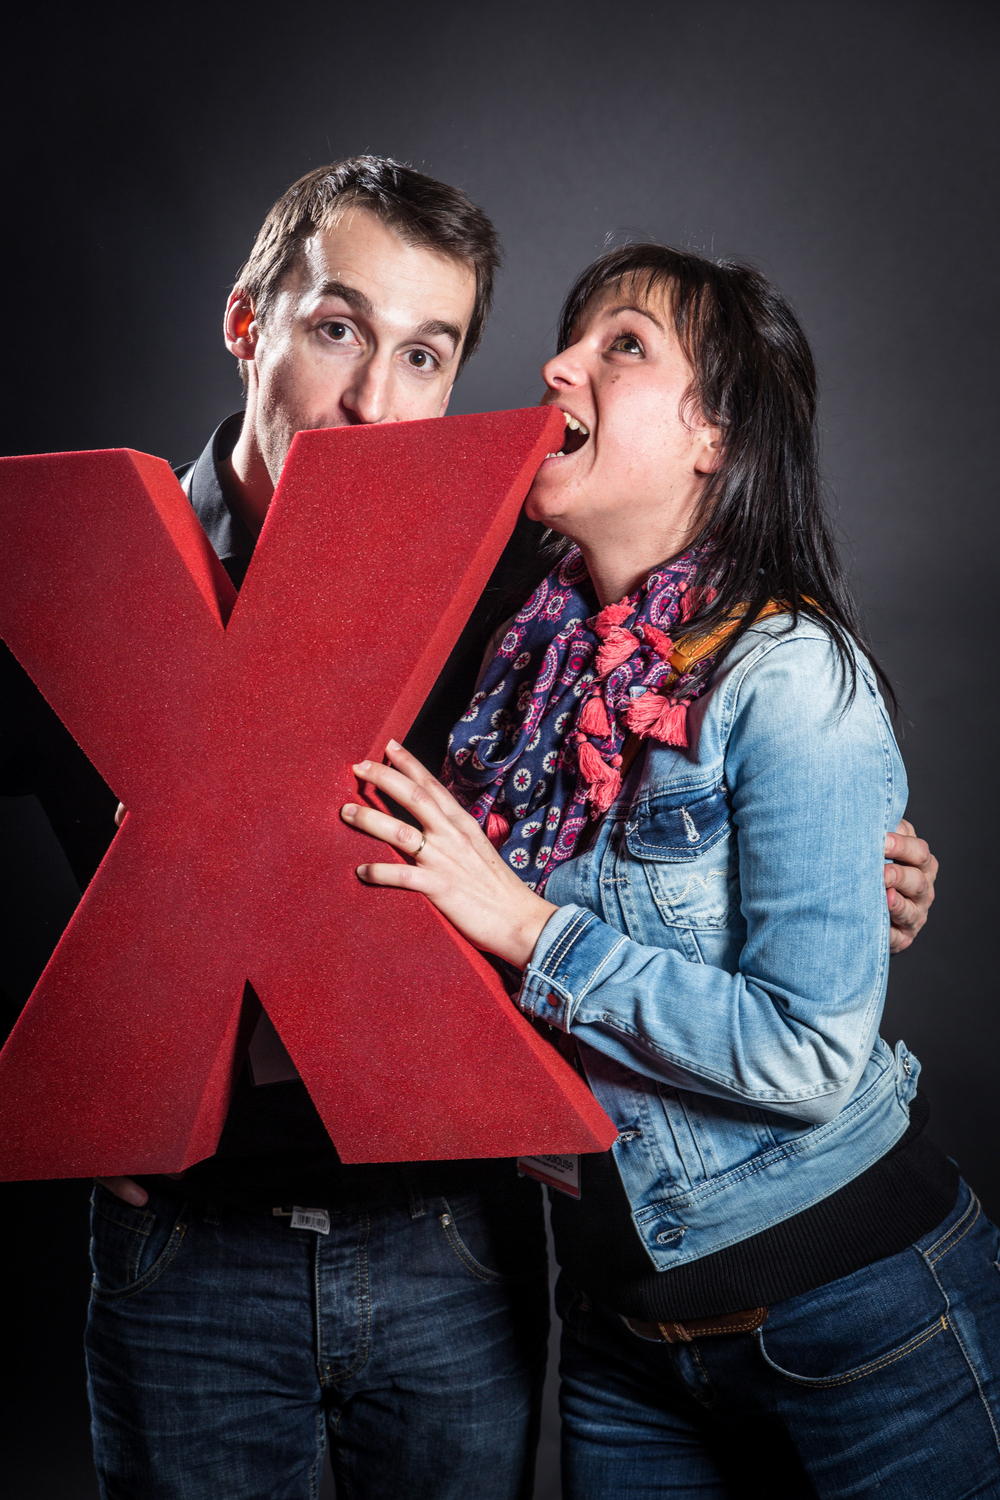 two people making a silly face while holding a x symbol